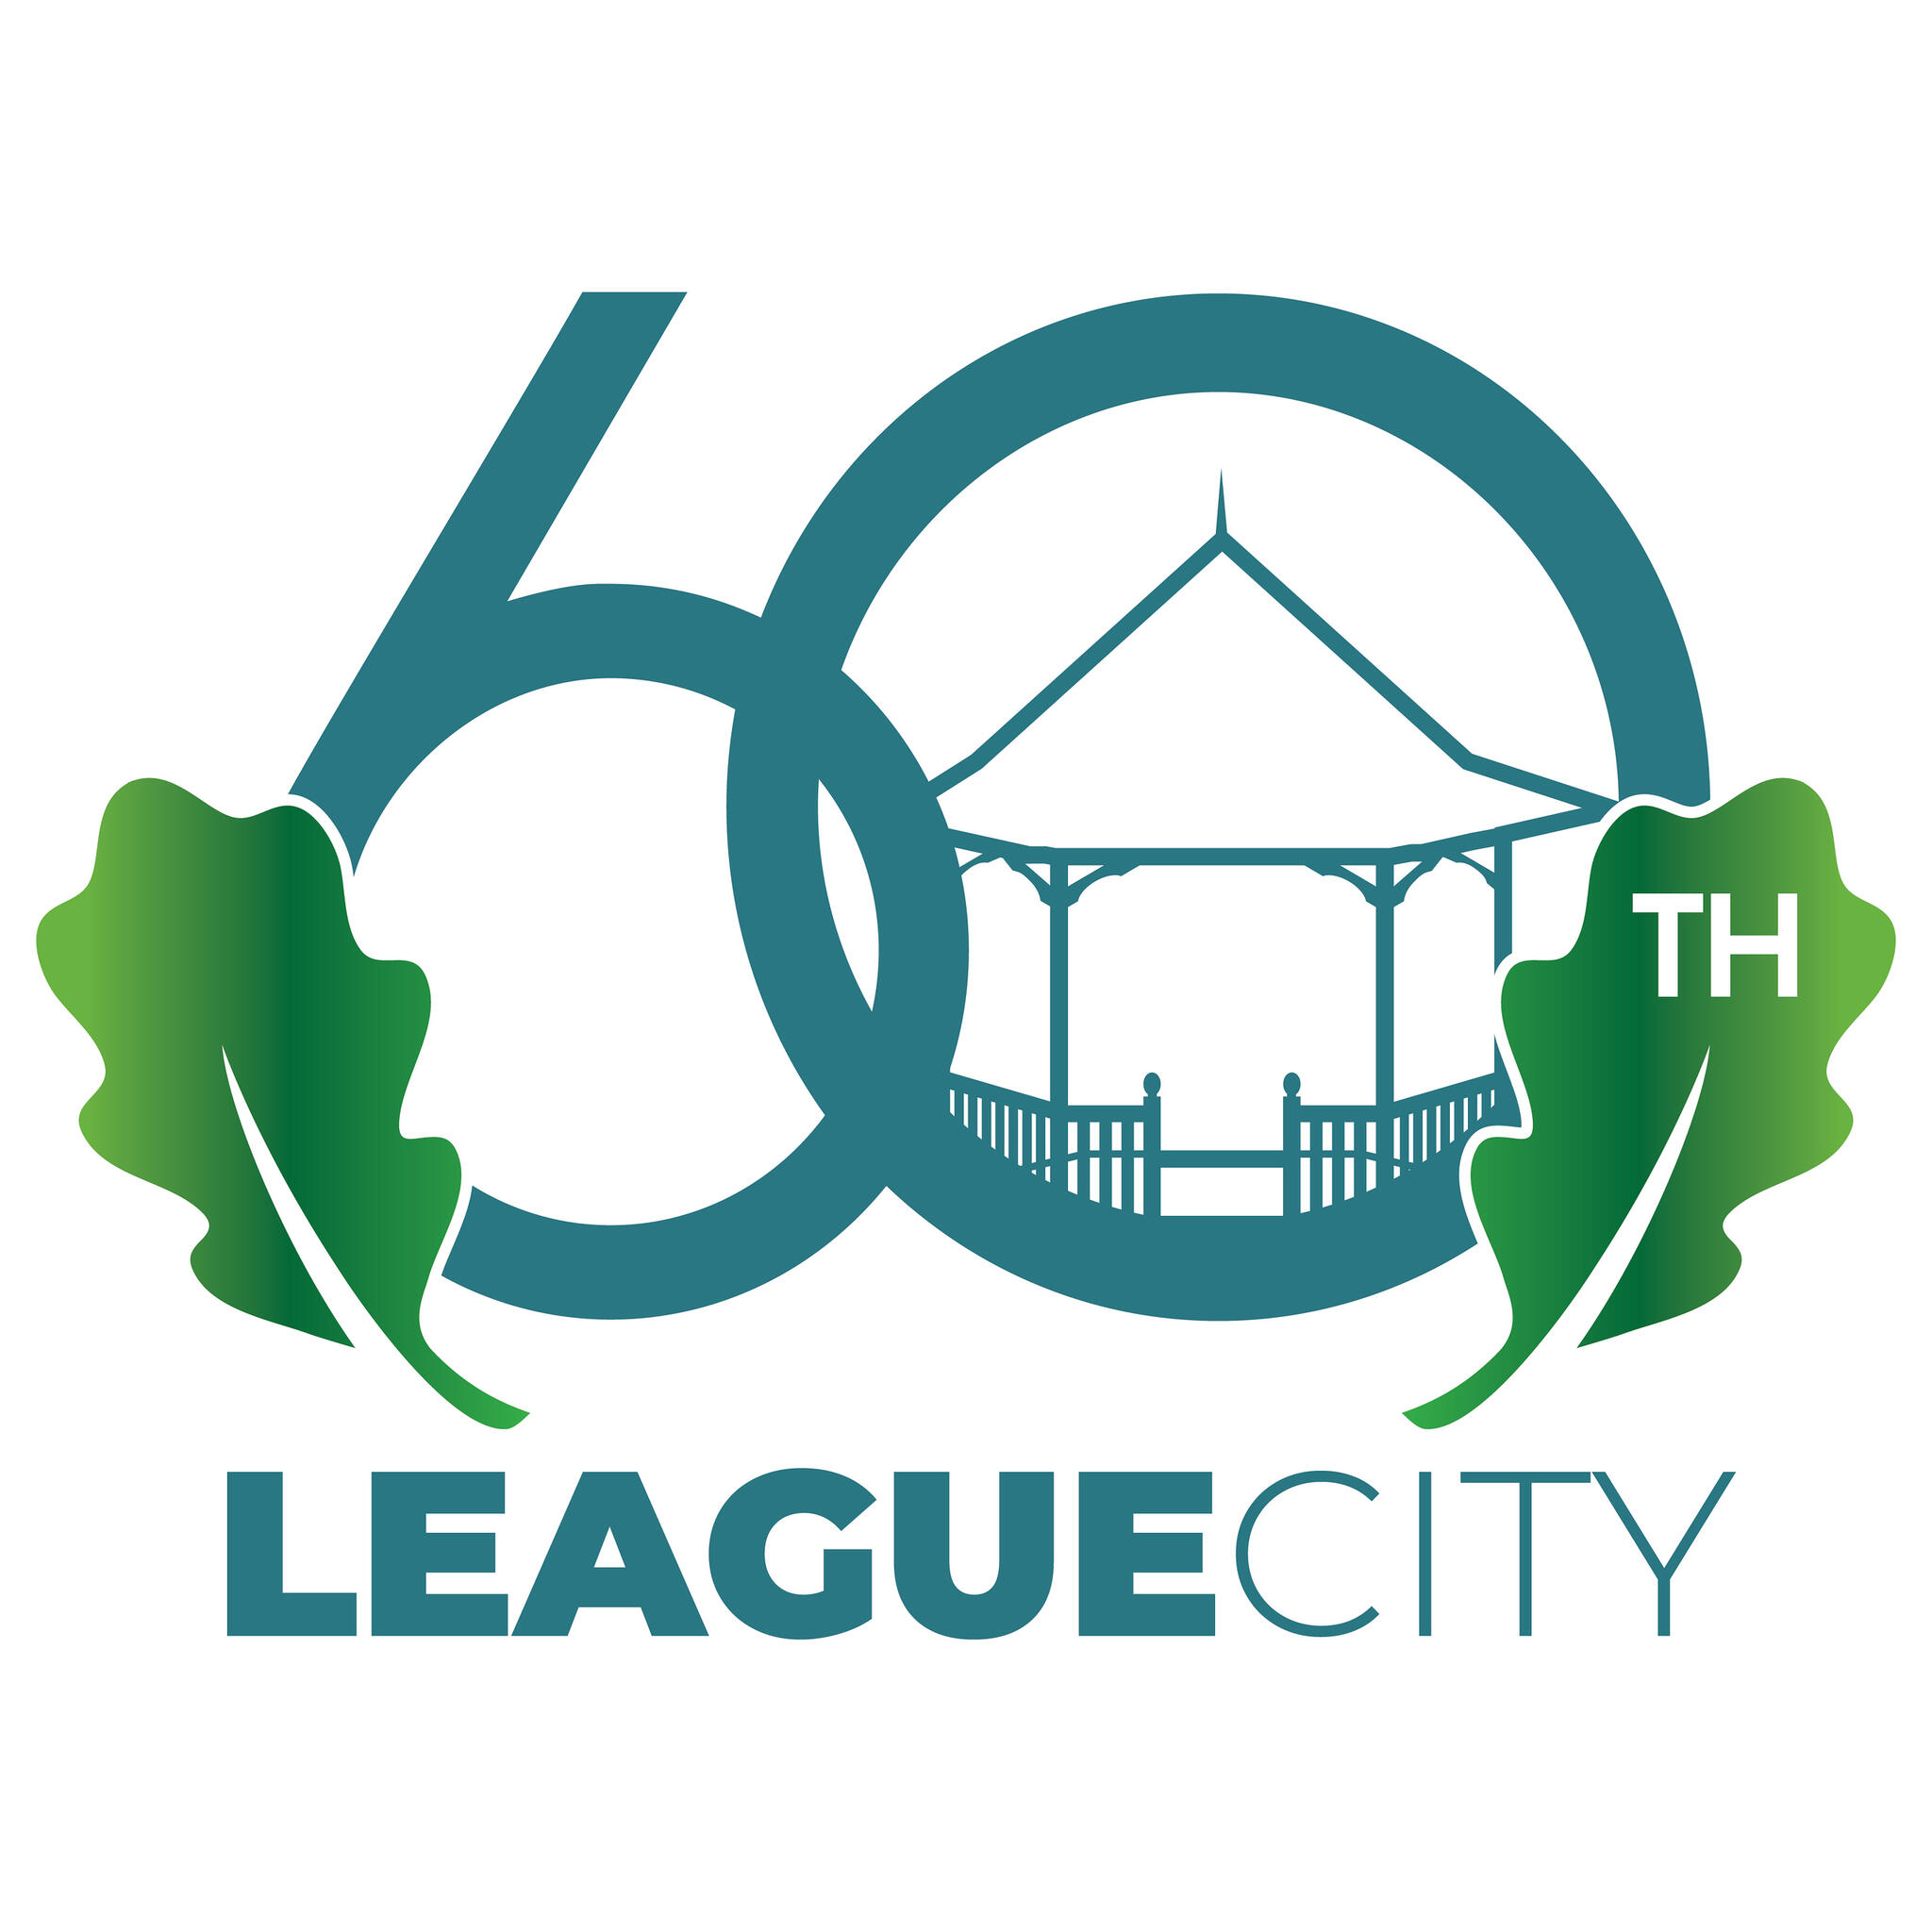 👉 8 Great Things To Do in League City 😎 (City of League City